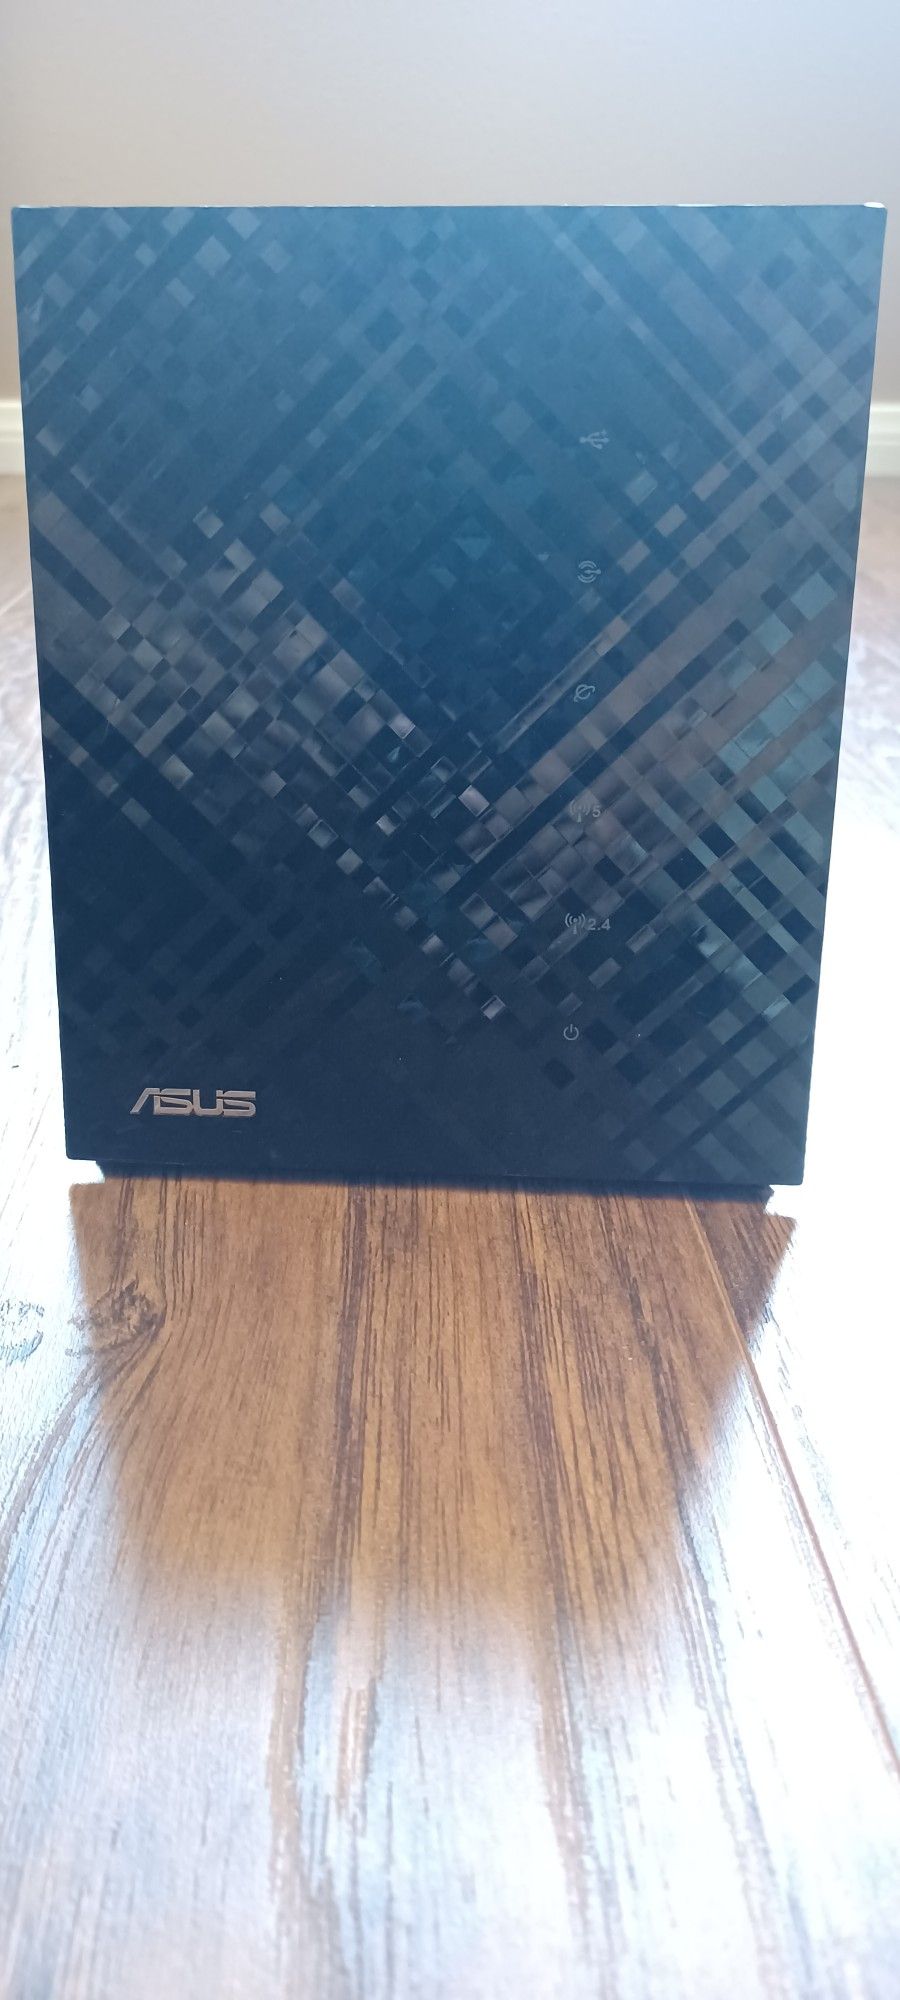 RT-N56U - Asus Wireless Router

